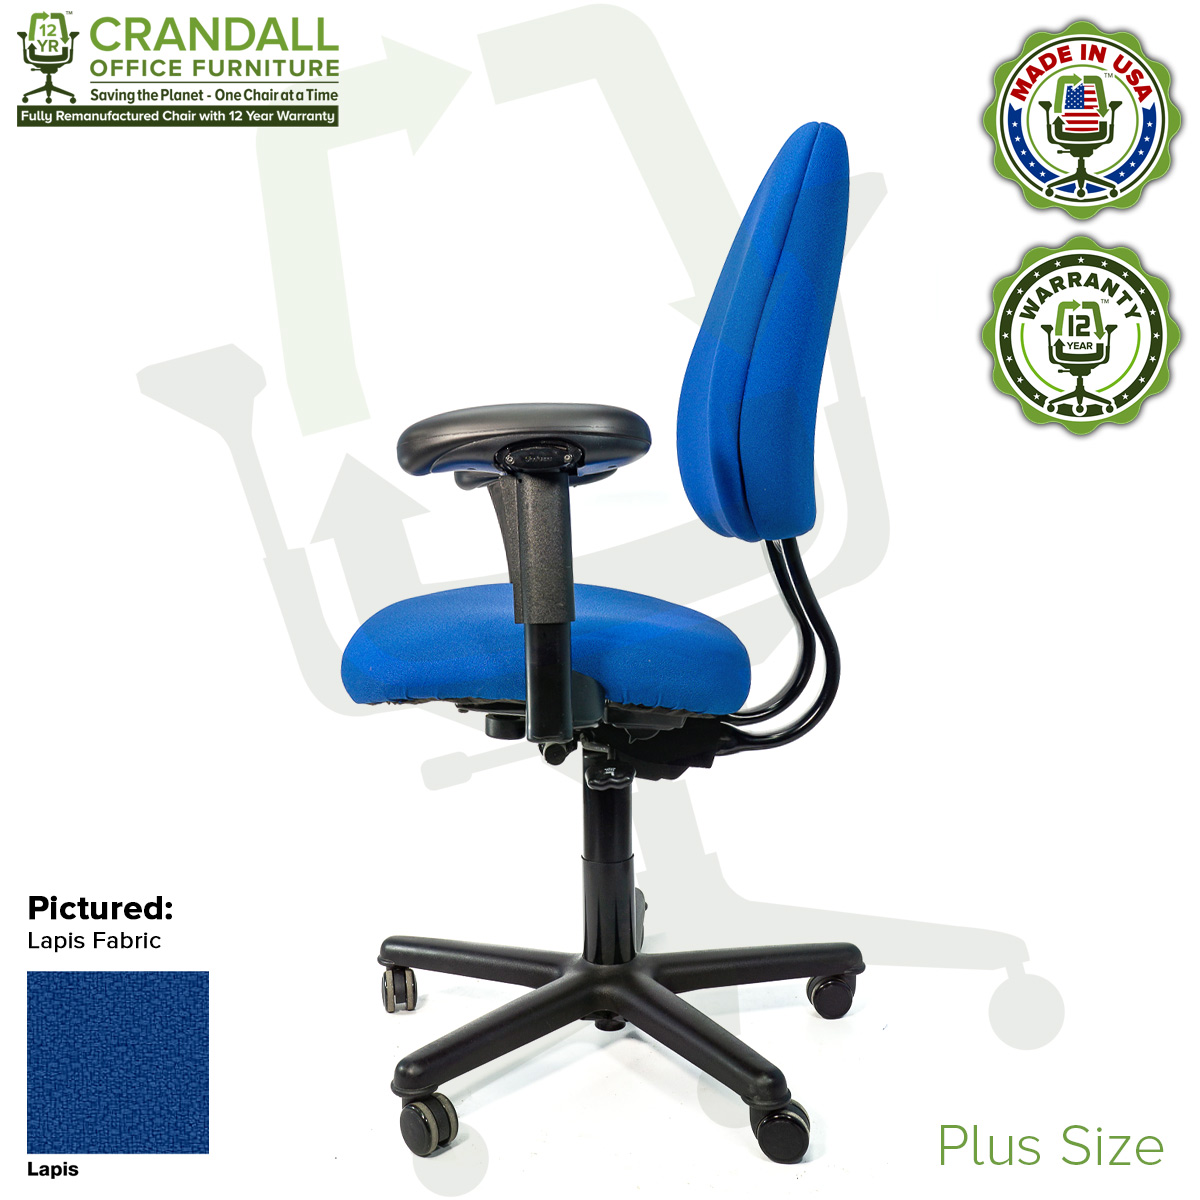 Crandall Office Furniture Remanufactured Steelcase Criterion Plus Chair with 12 Year Warranty - 03